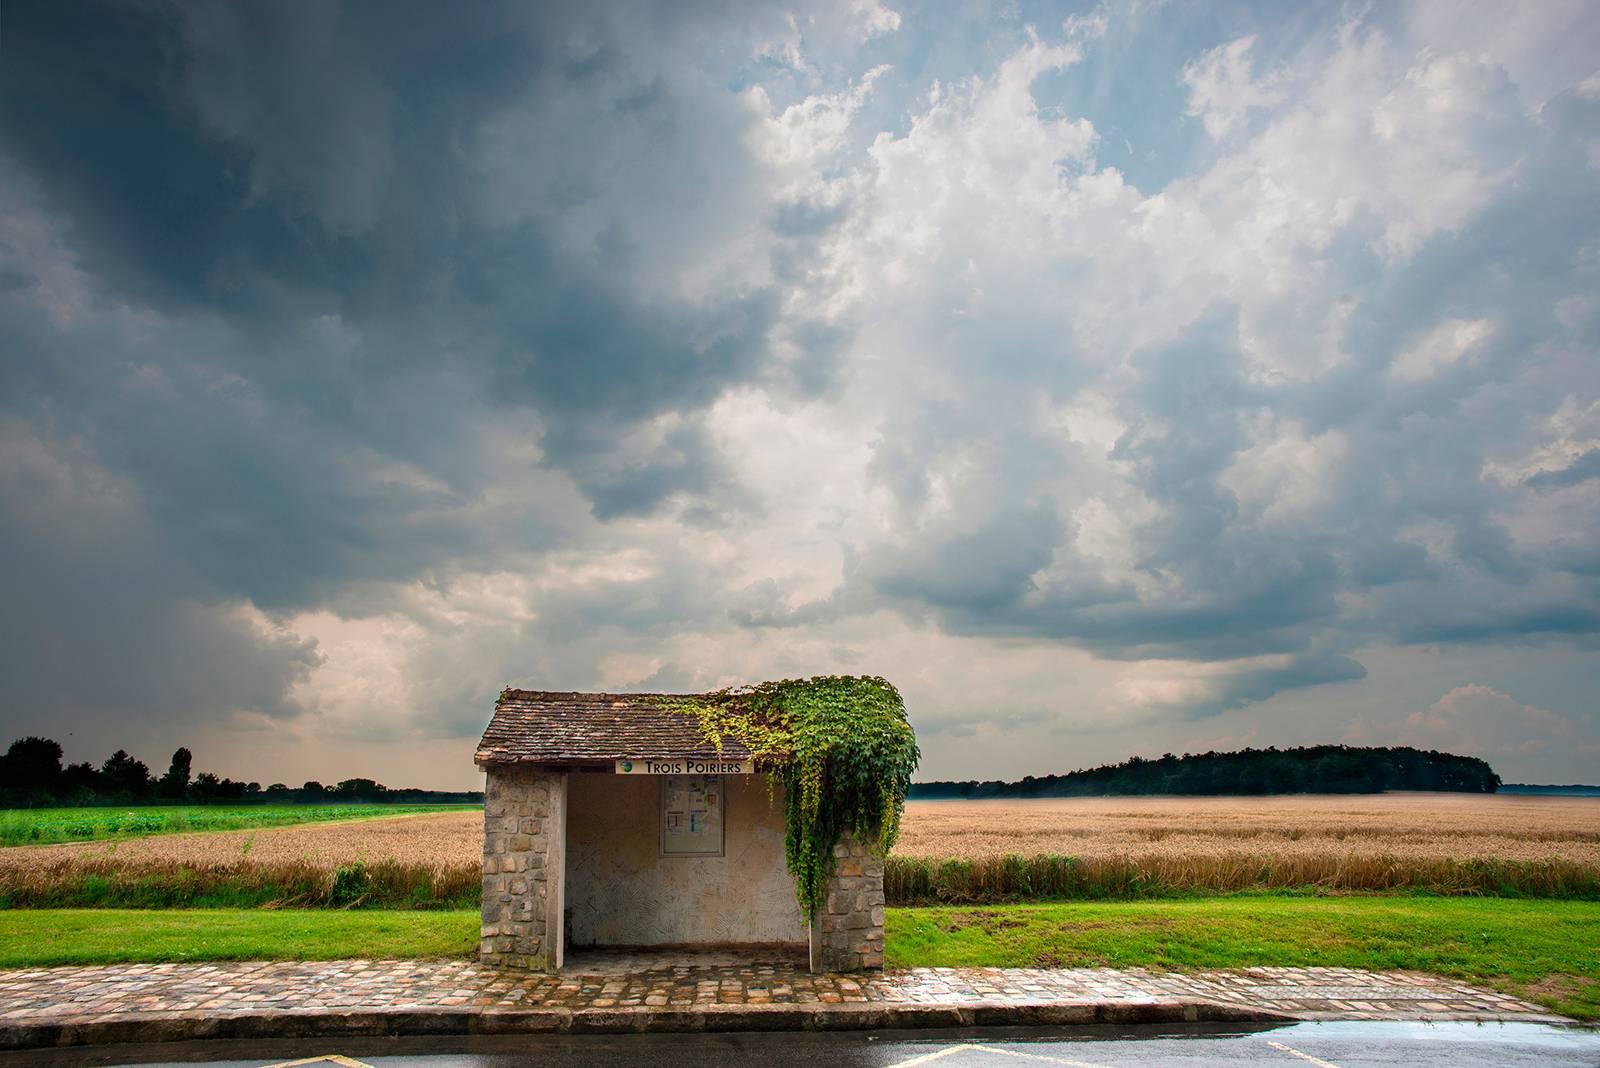 Albert Delamour Landscape Photograph - French Countryside, Barbizon, France, Old house on countryside road